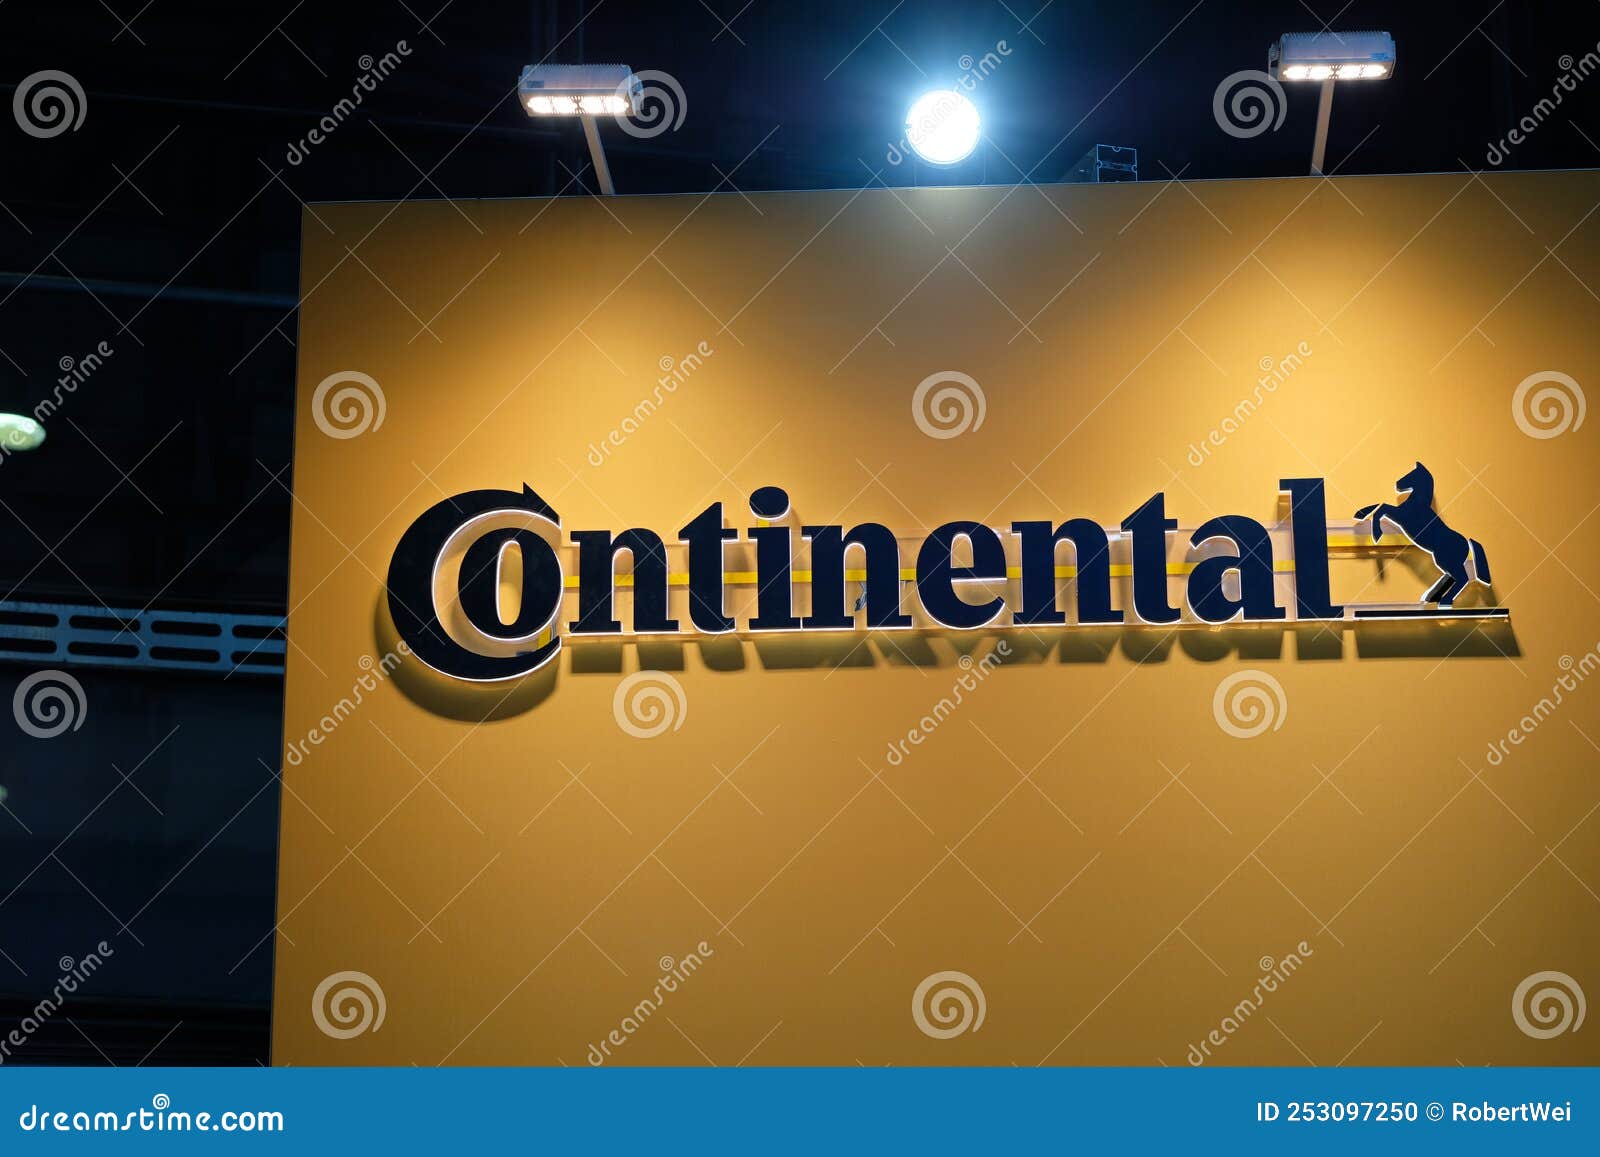 Close Up Brand Logo of Continental Automotive Editorial Image